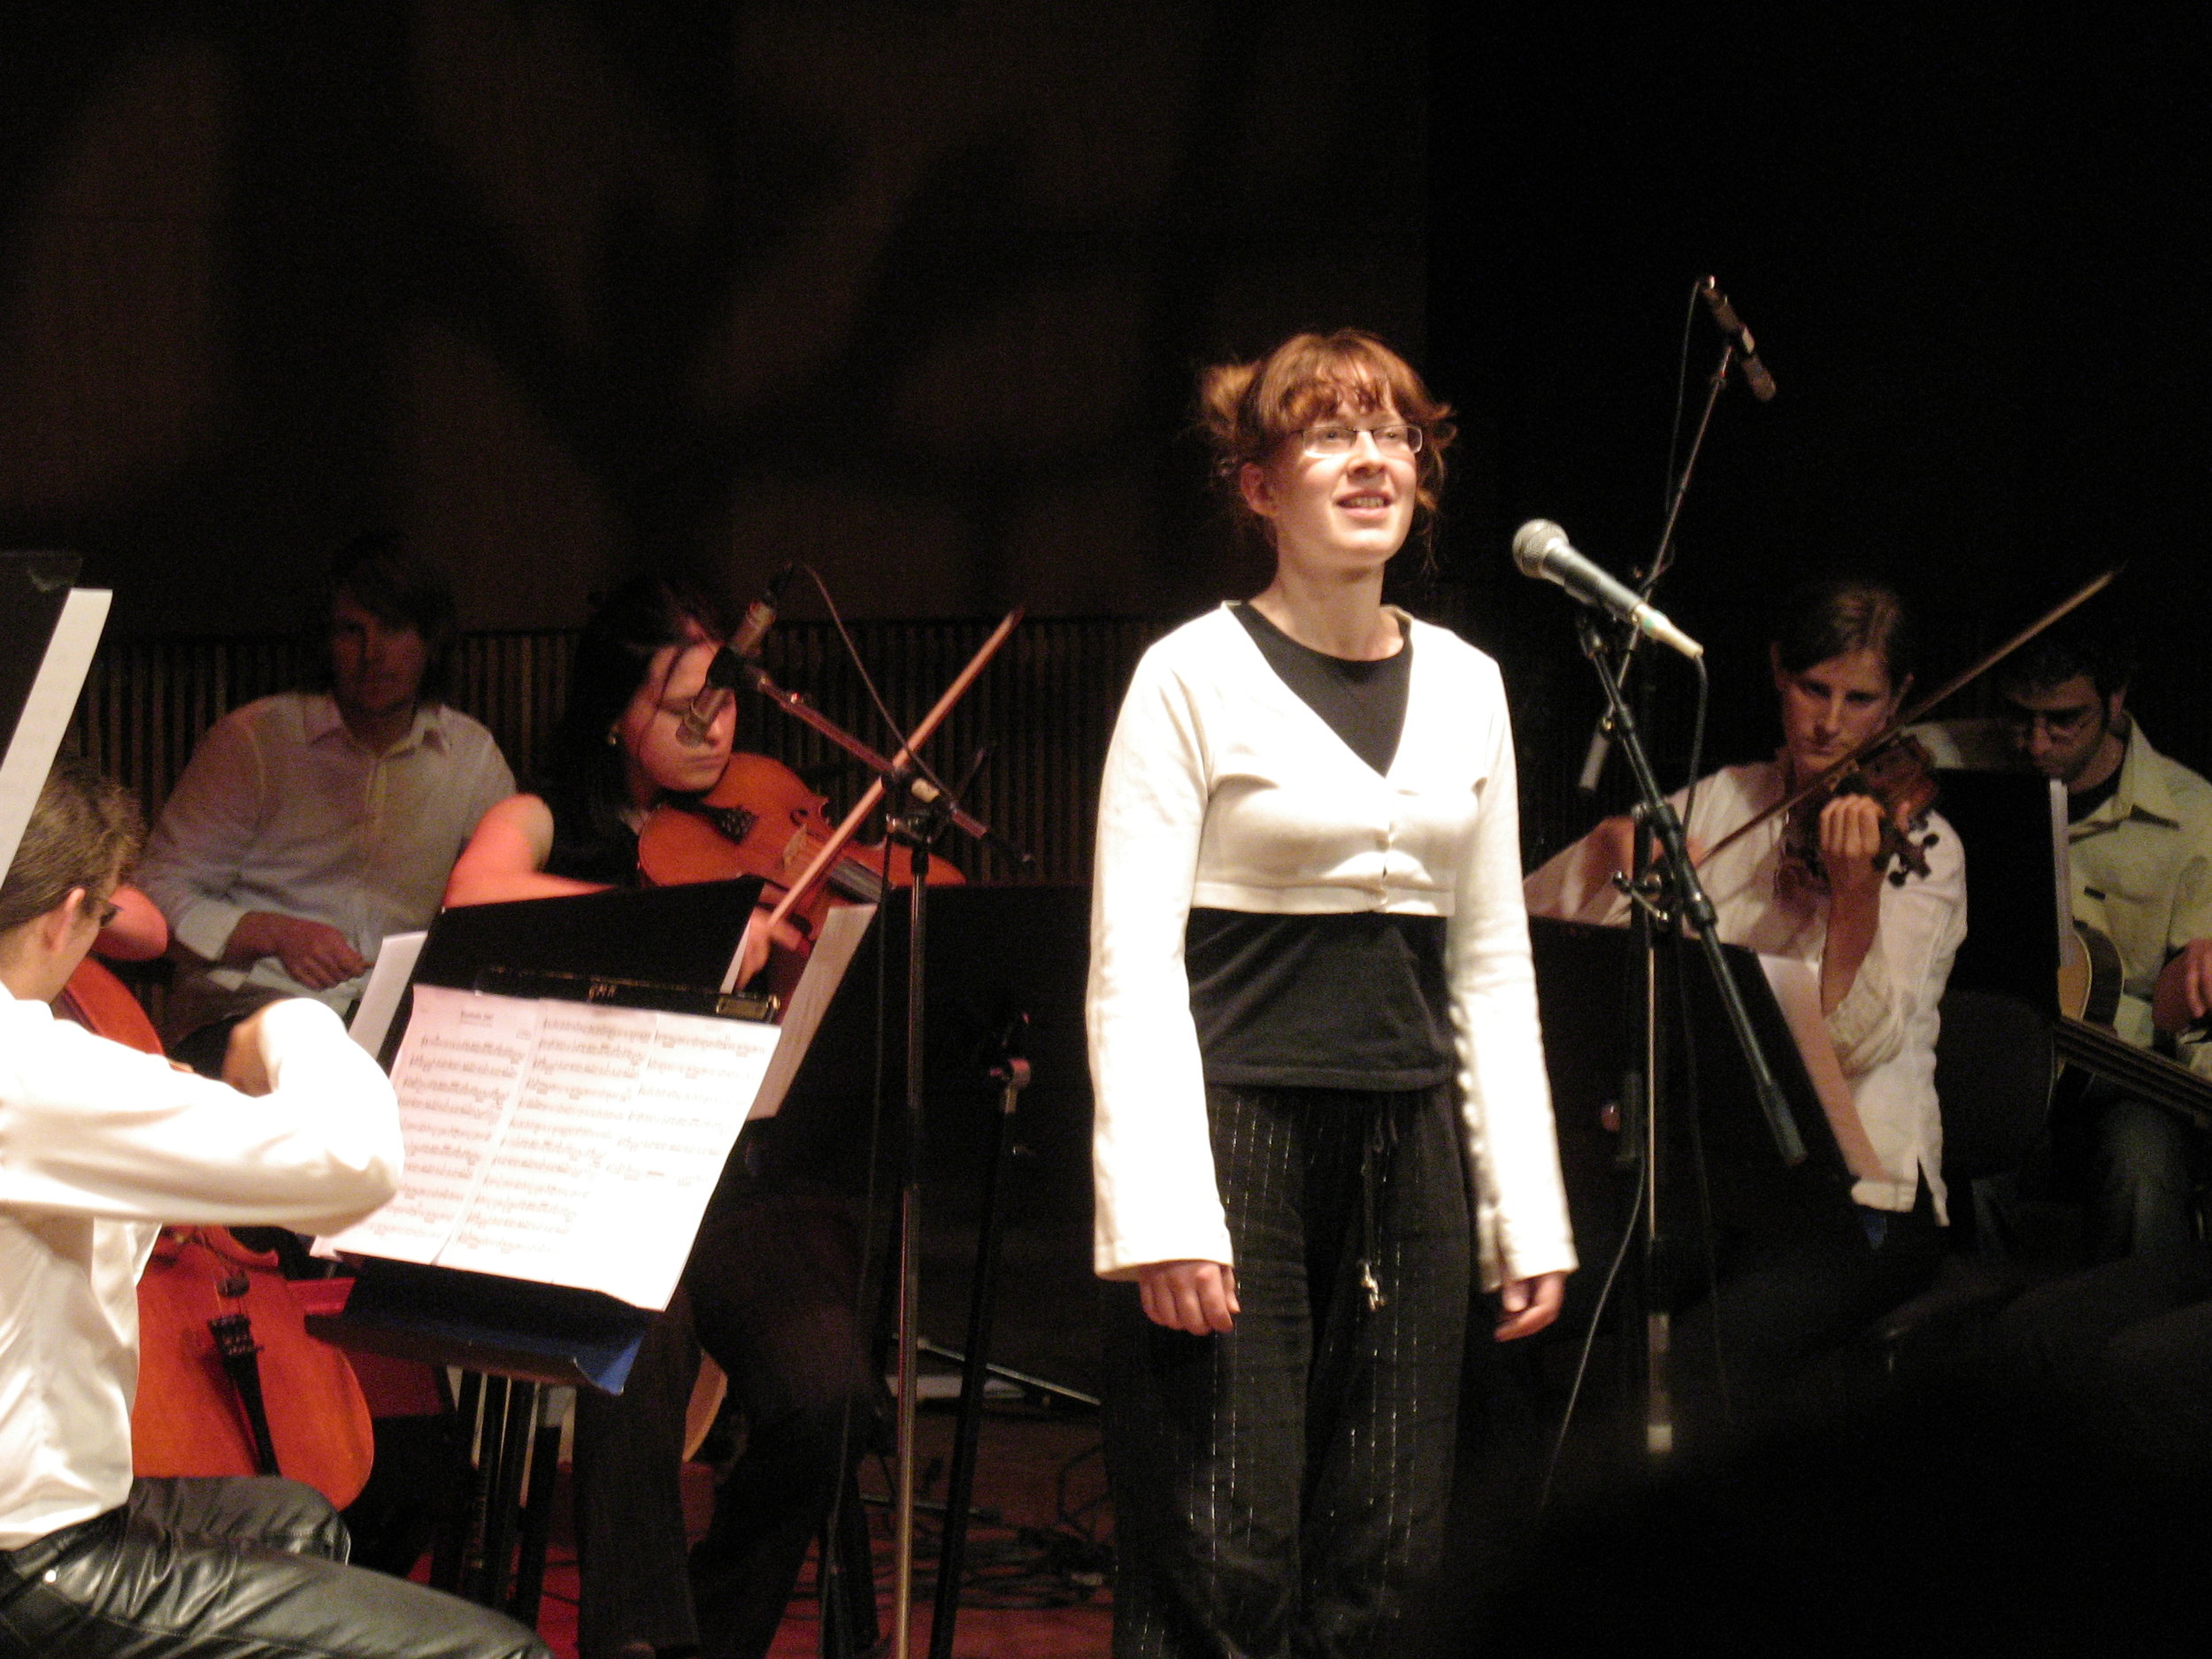 Pictures from the examination concert 037.jpg